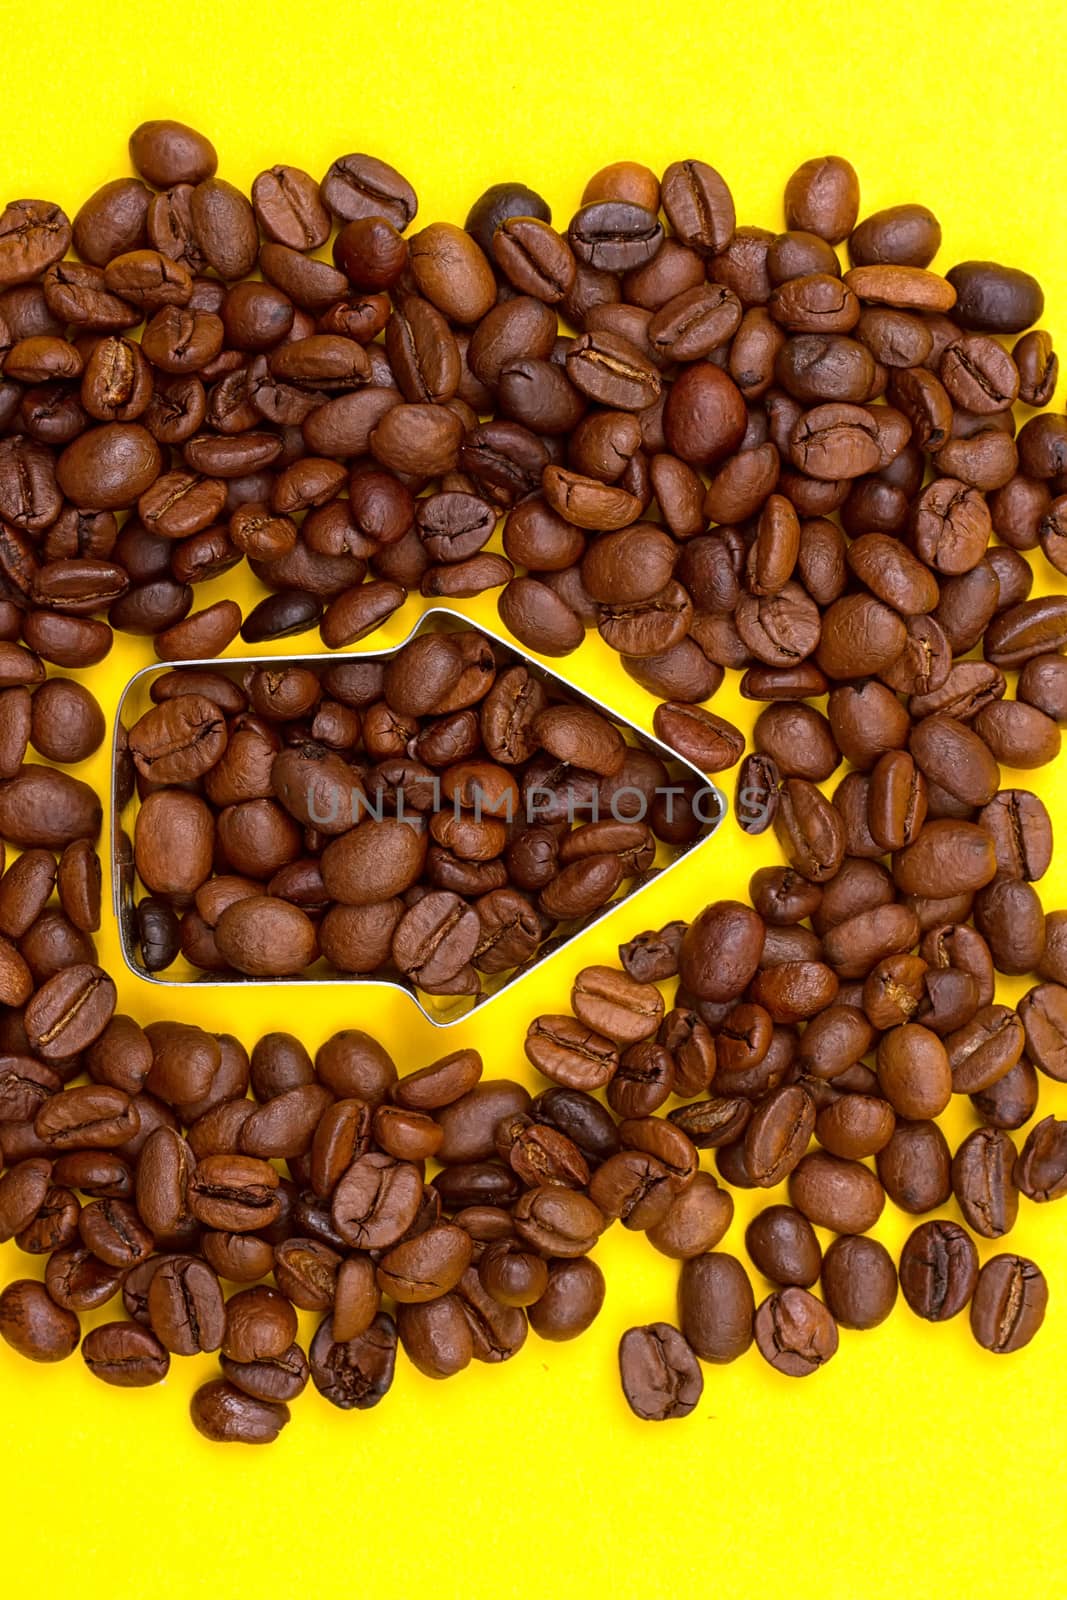 Right arrow of coffee beans by victosha